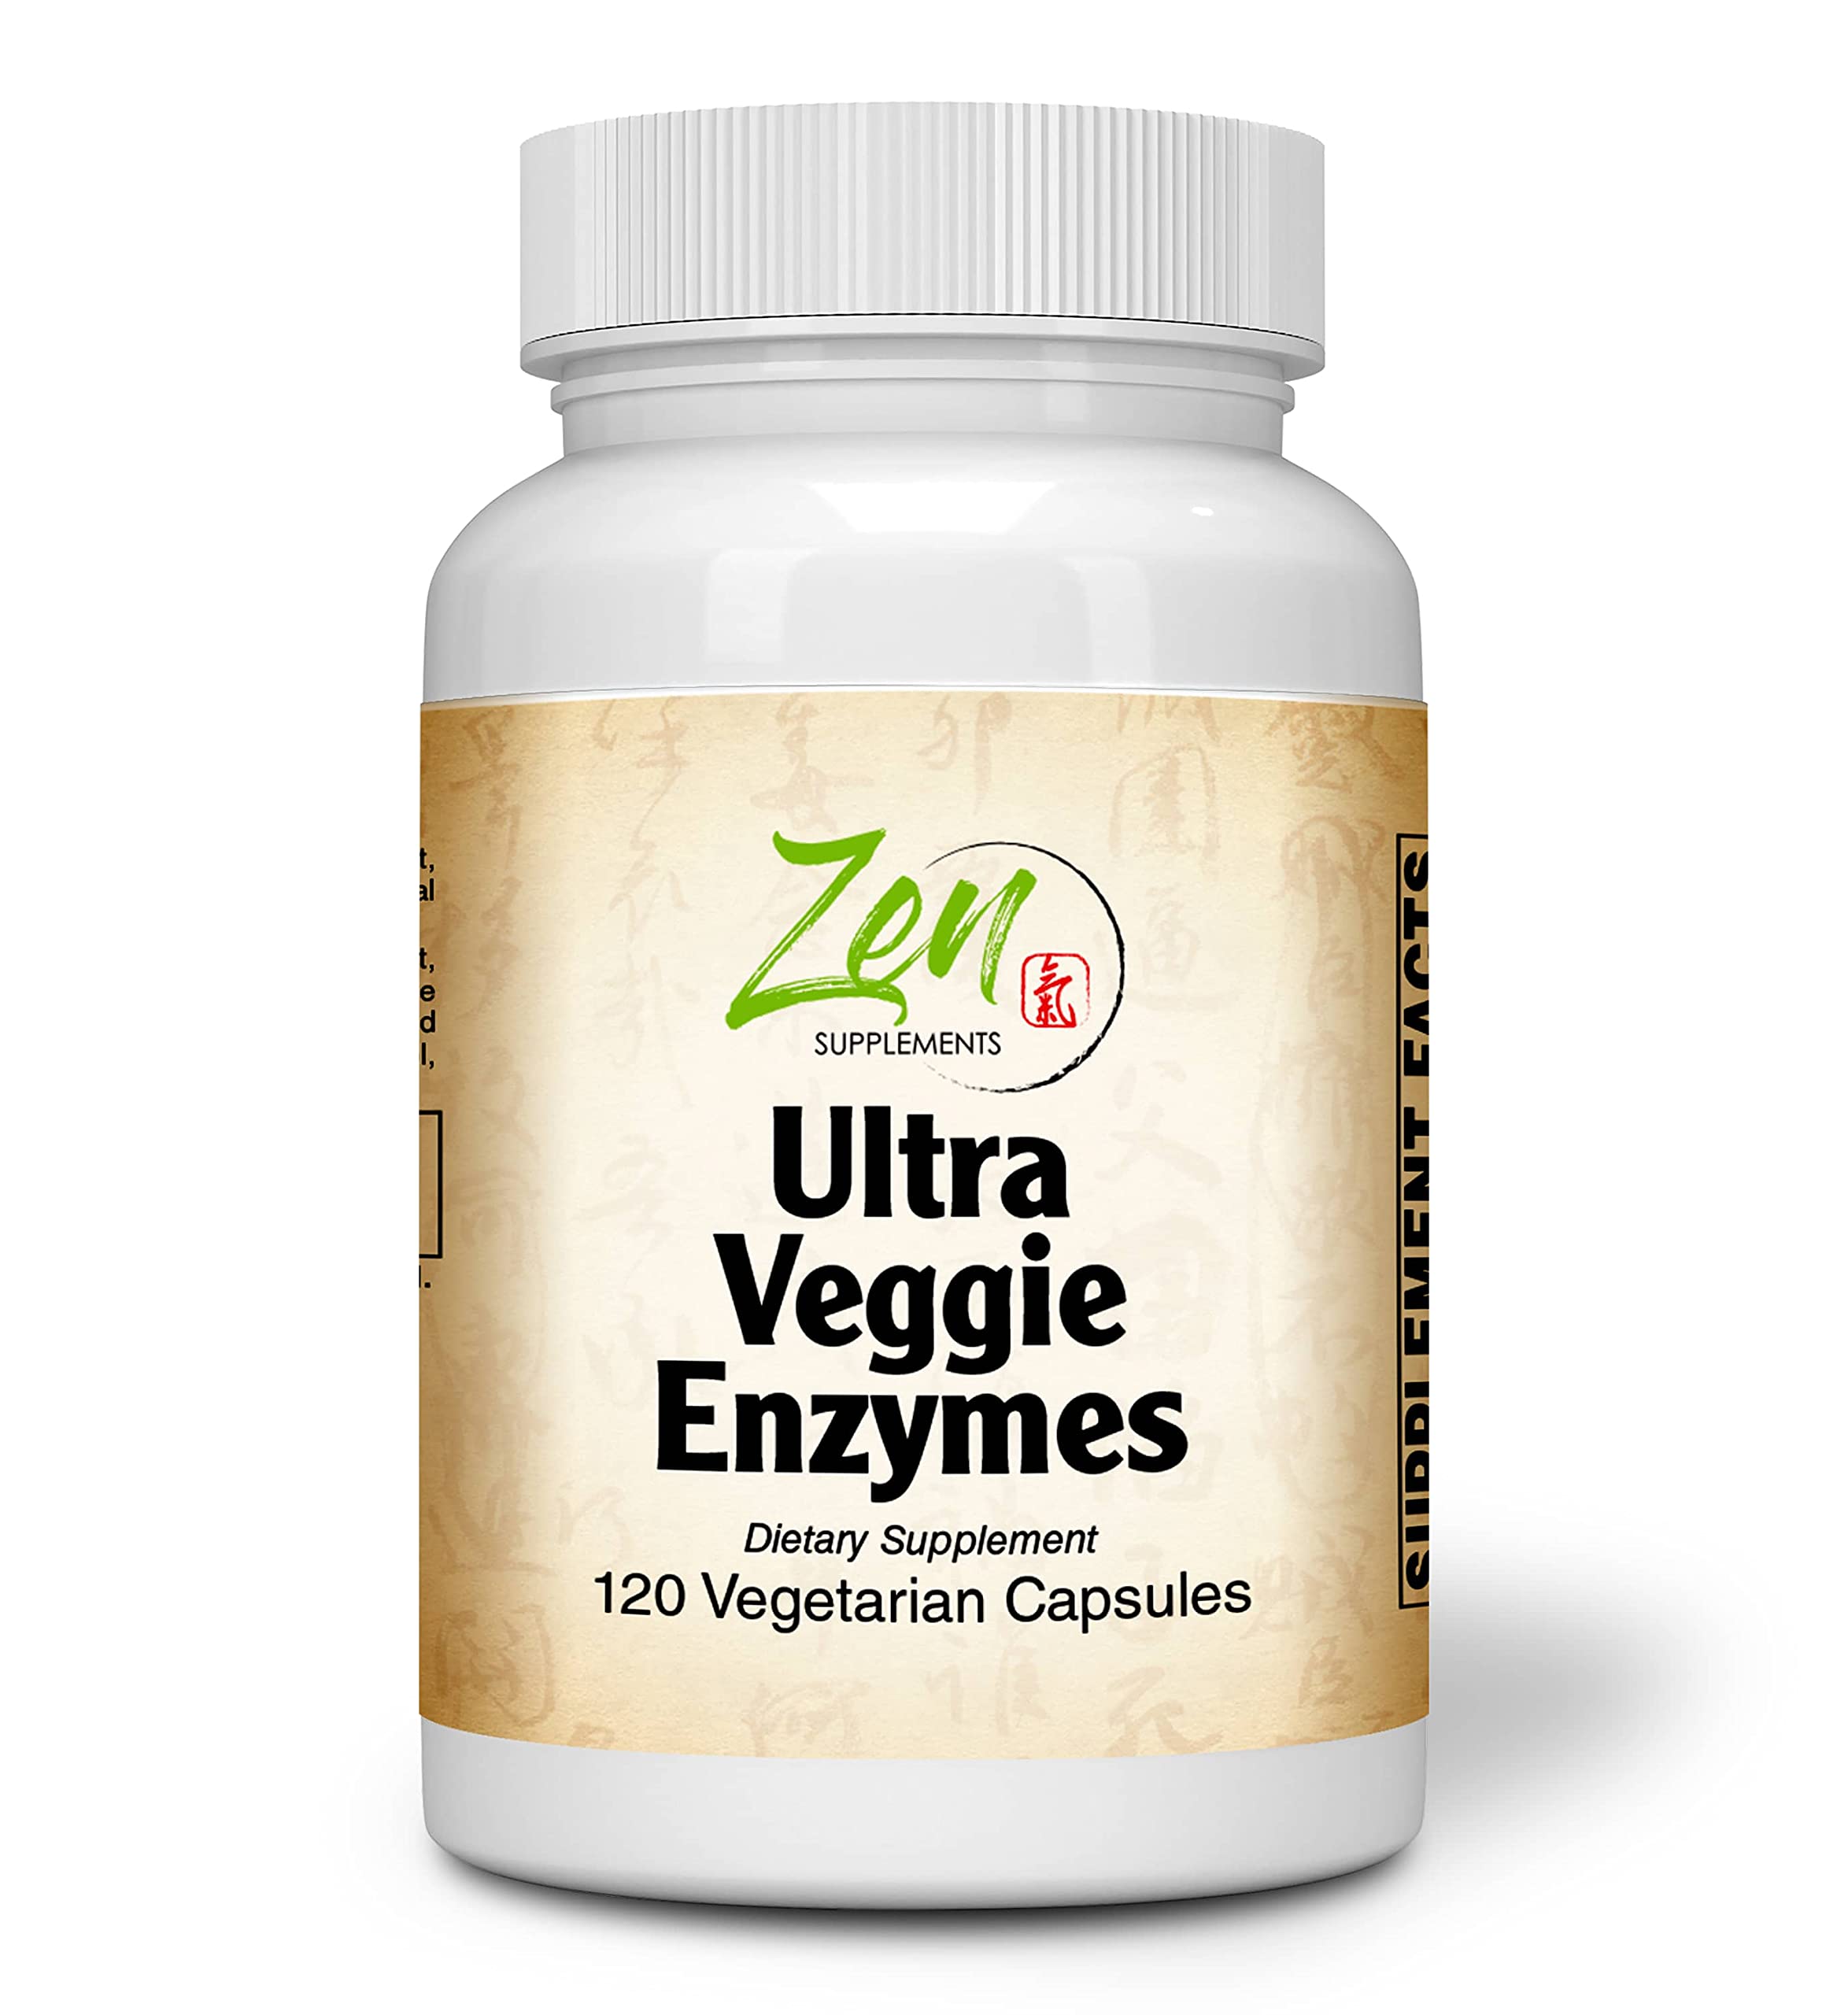 Zen Supplements - Ultra Veggie Enzymes for Vegetarians and Vegans - Promotes Digestion of Vegetables, Beans and Carbohydrates to Help Reduce Occasional Gas and Bloating 120-Vegcaps